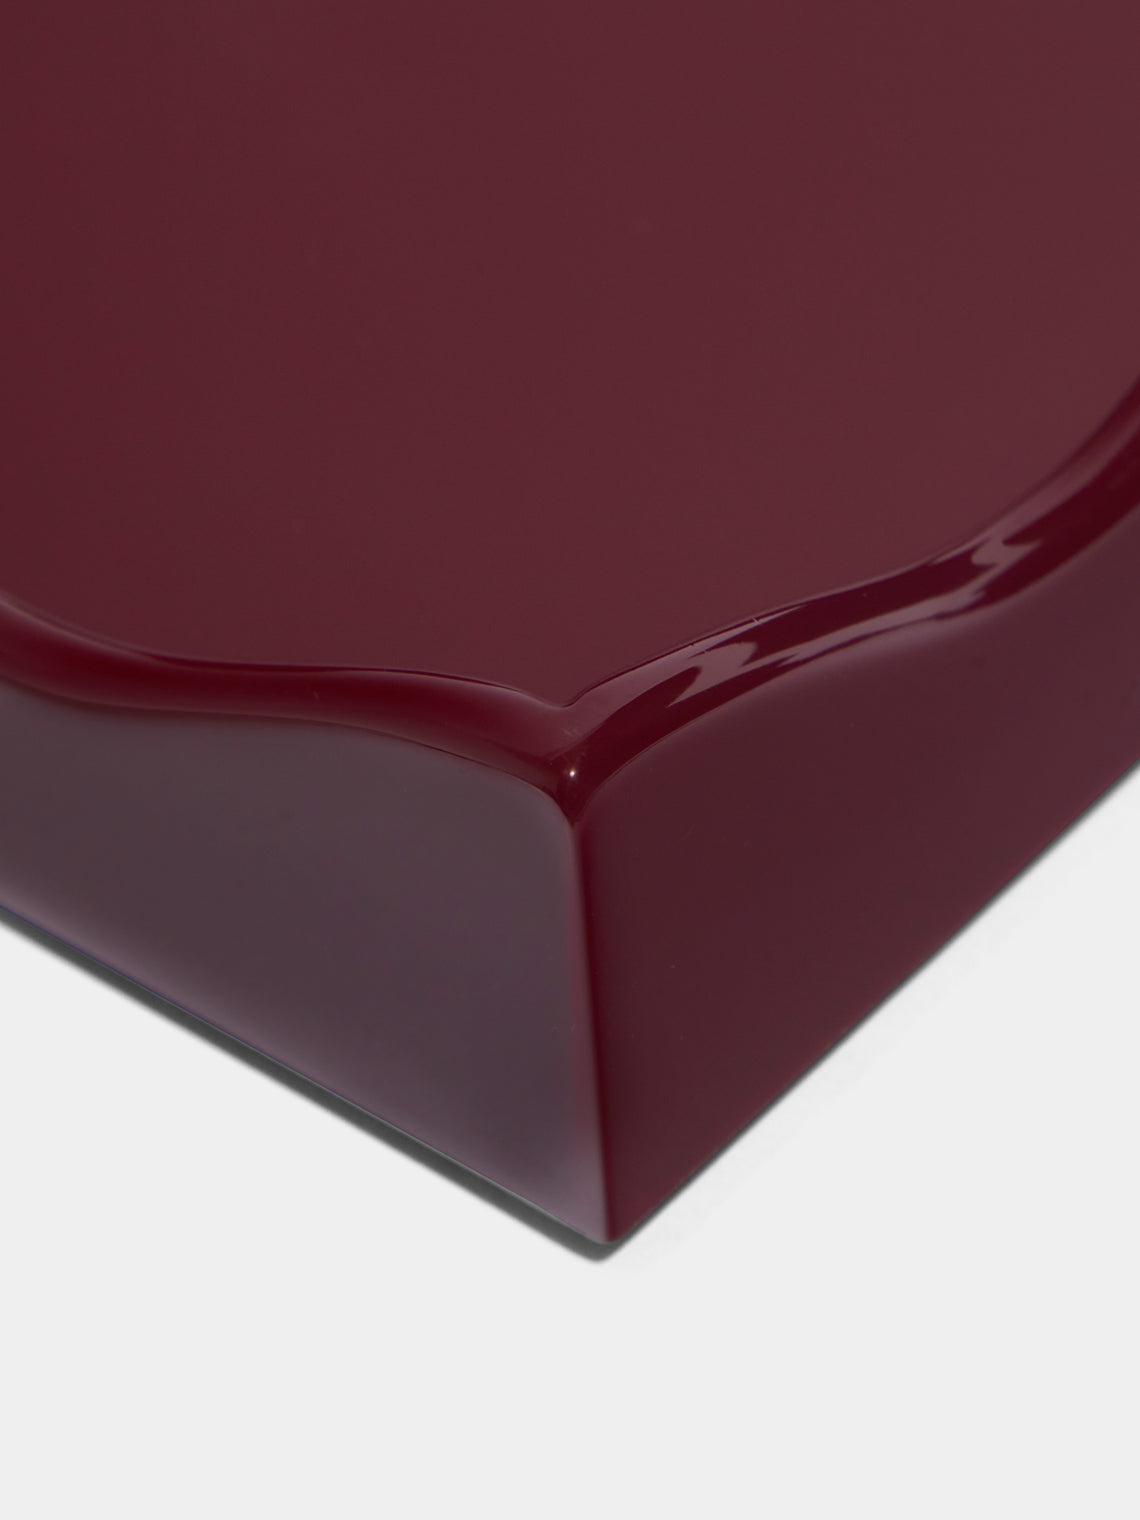 The Lacquer Company - Belles Rives Lacquered Small Tray - Red - ABASK